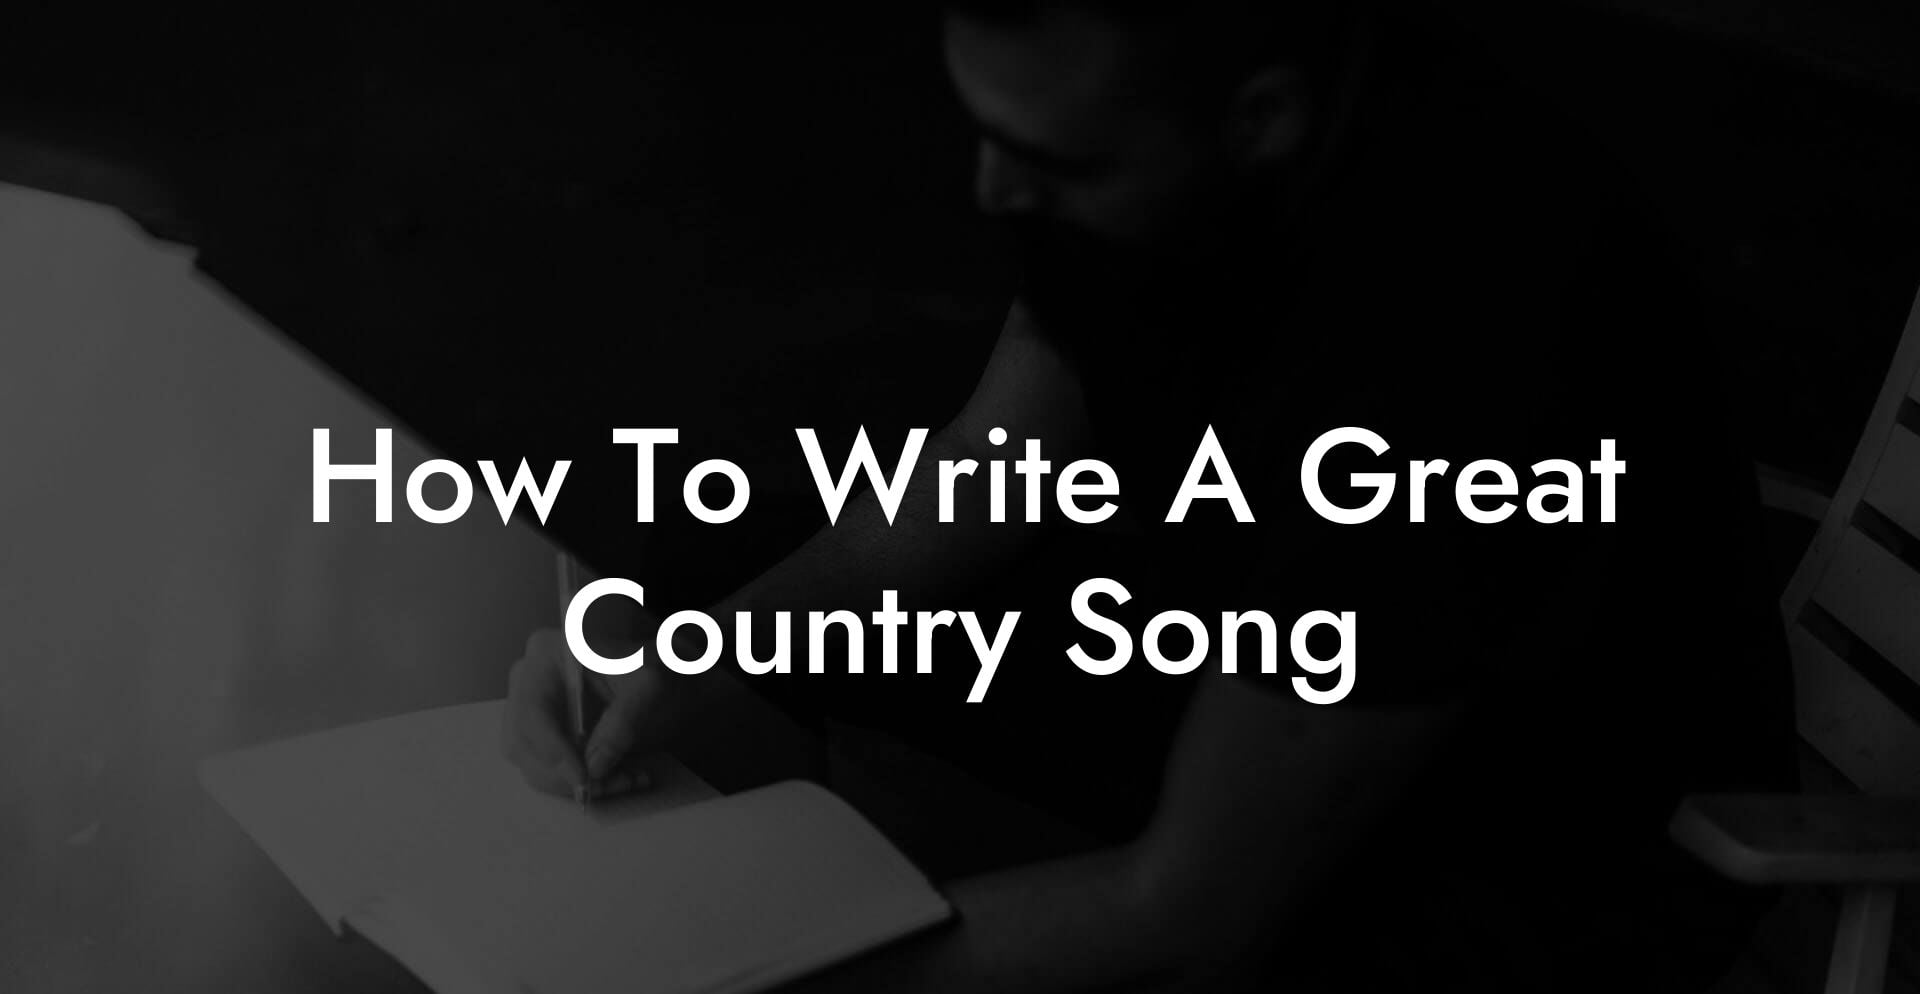 how to write a great country song lyric assistant